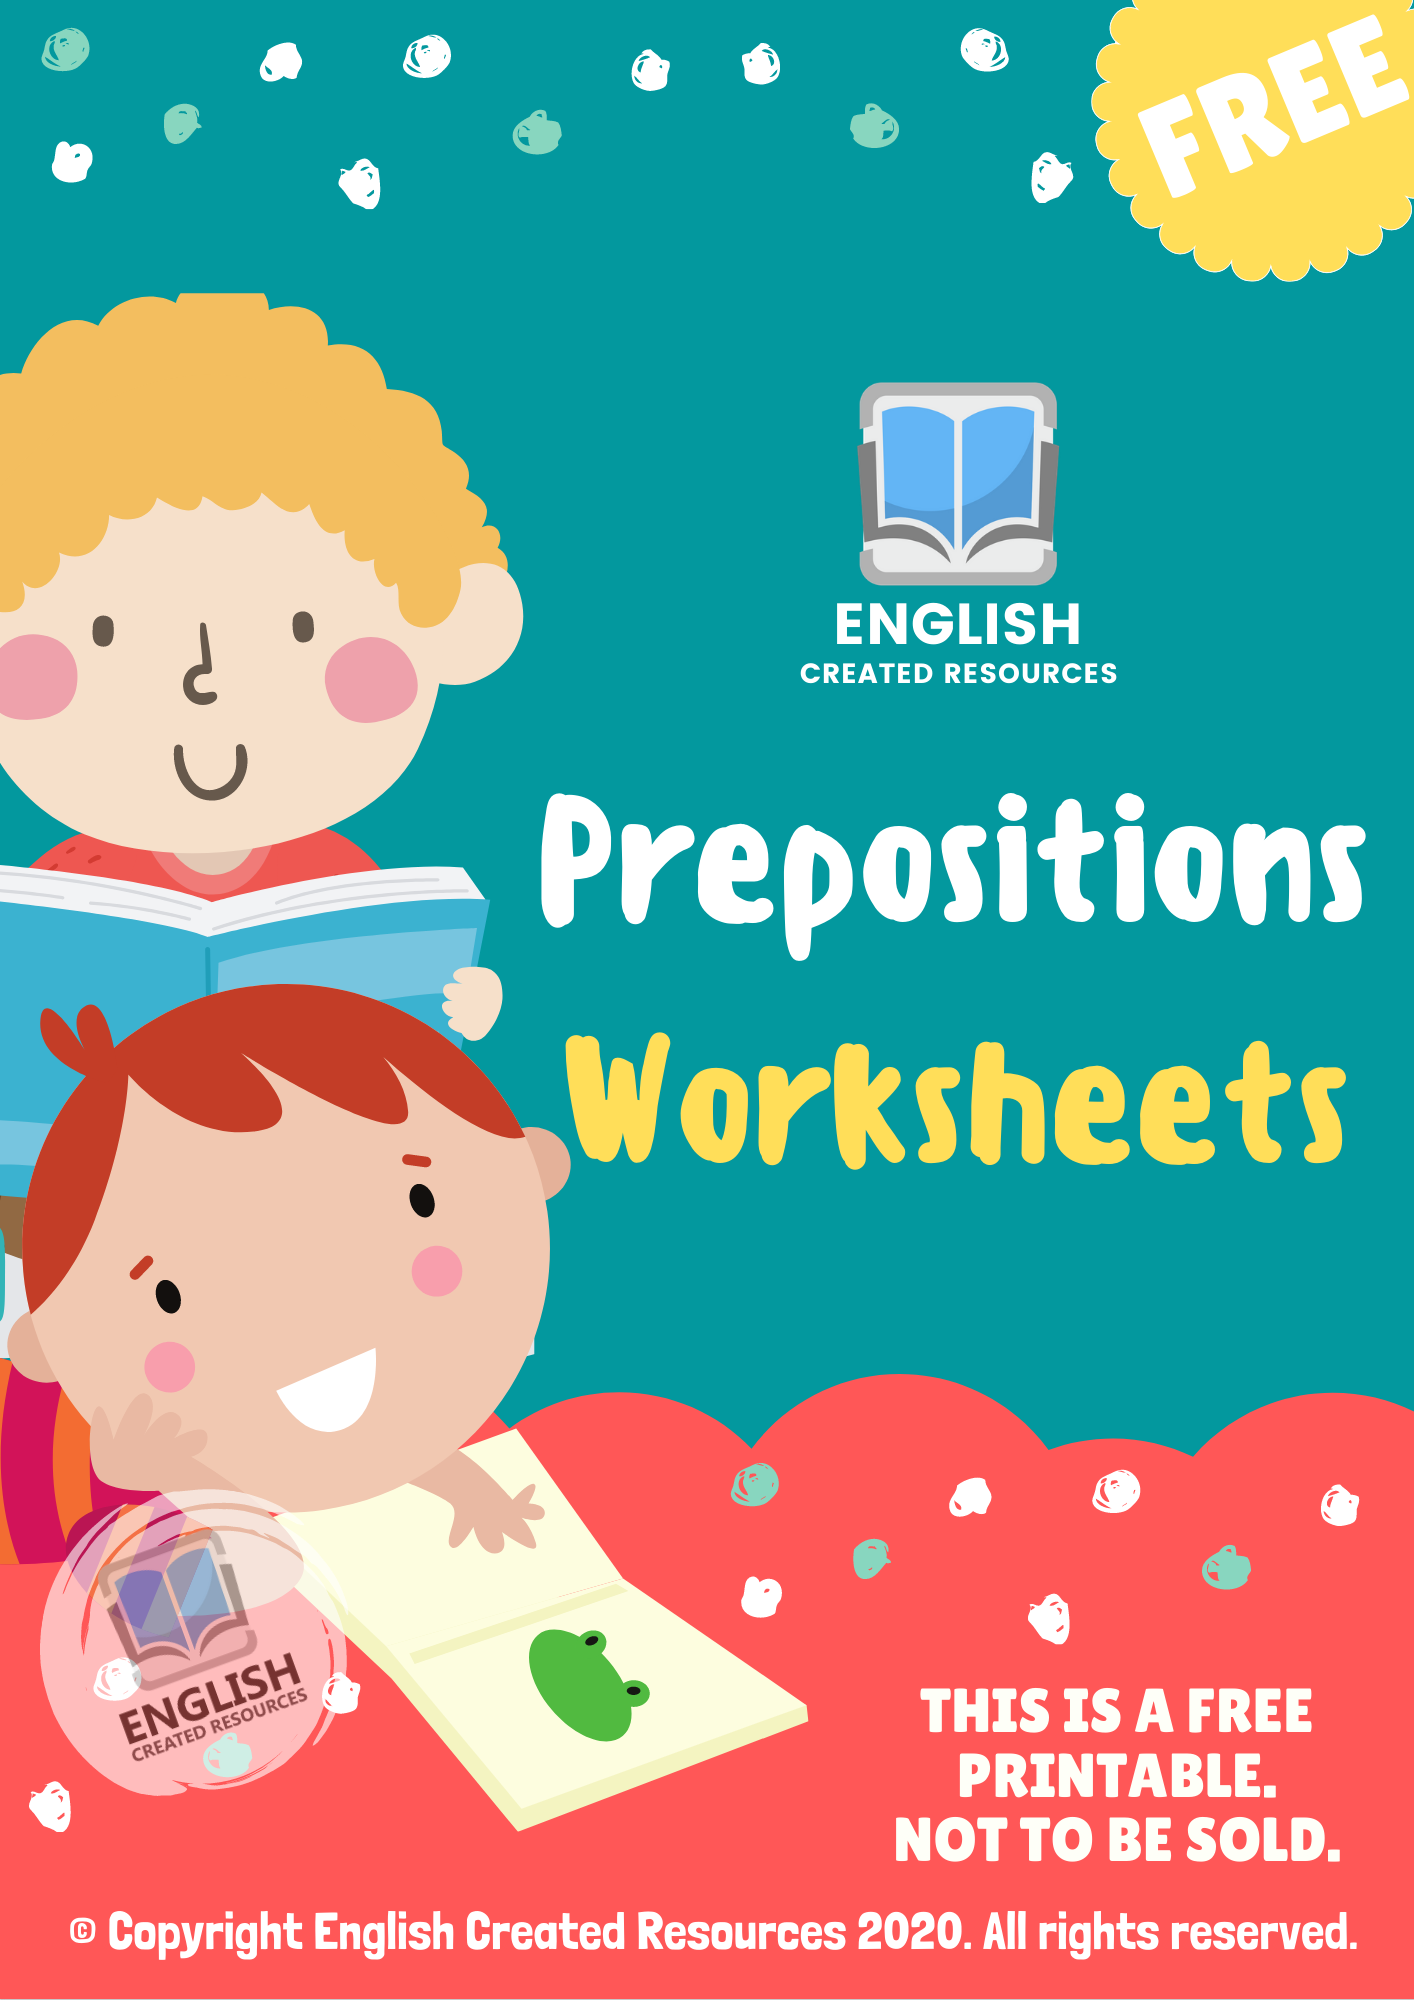 grammar-worksheets-english-created-resources